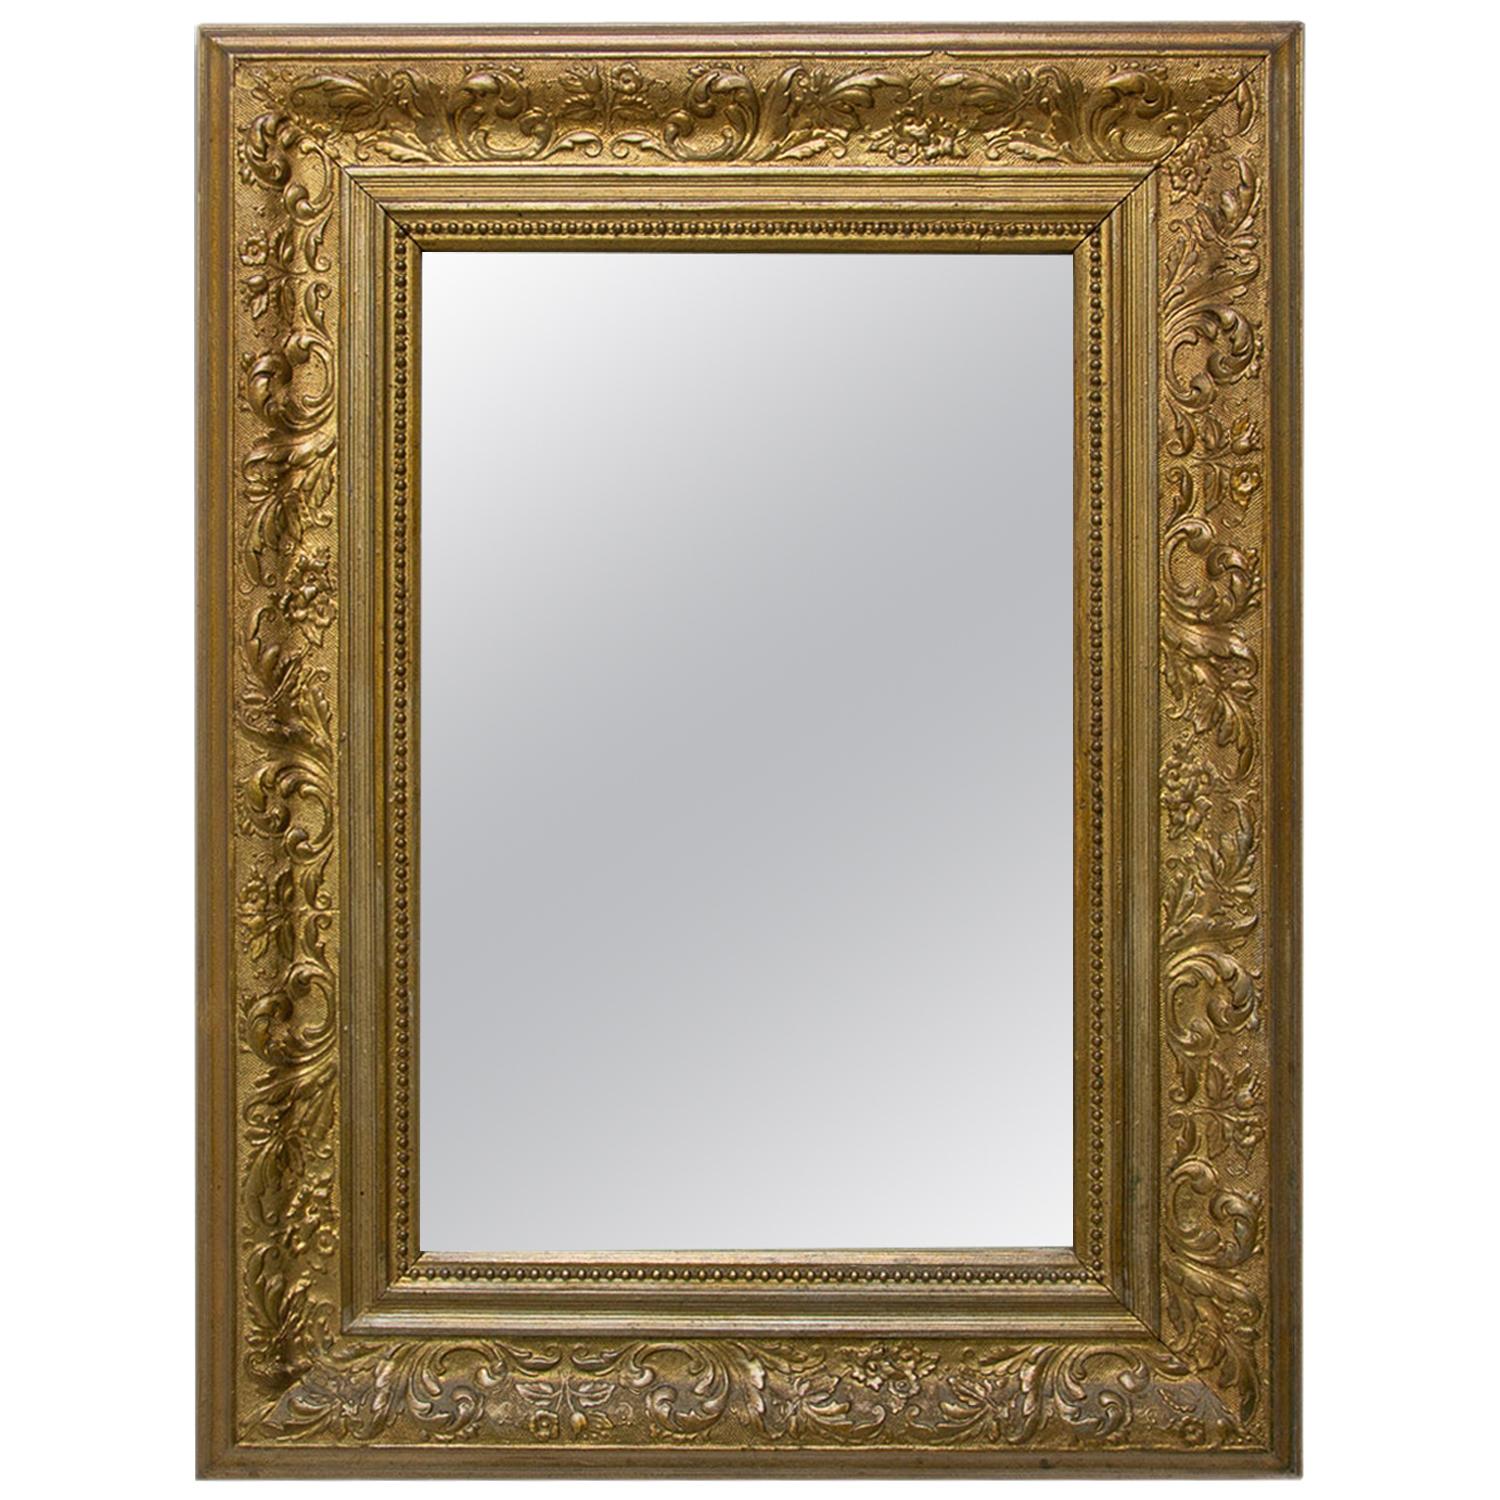 Antique Historicizing Mirror from the End of the 19th Century